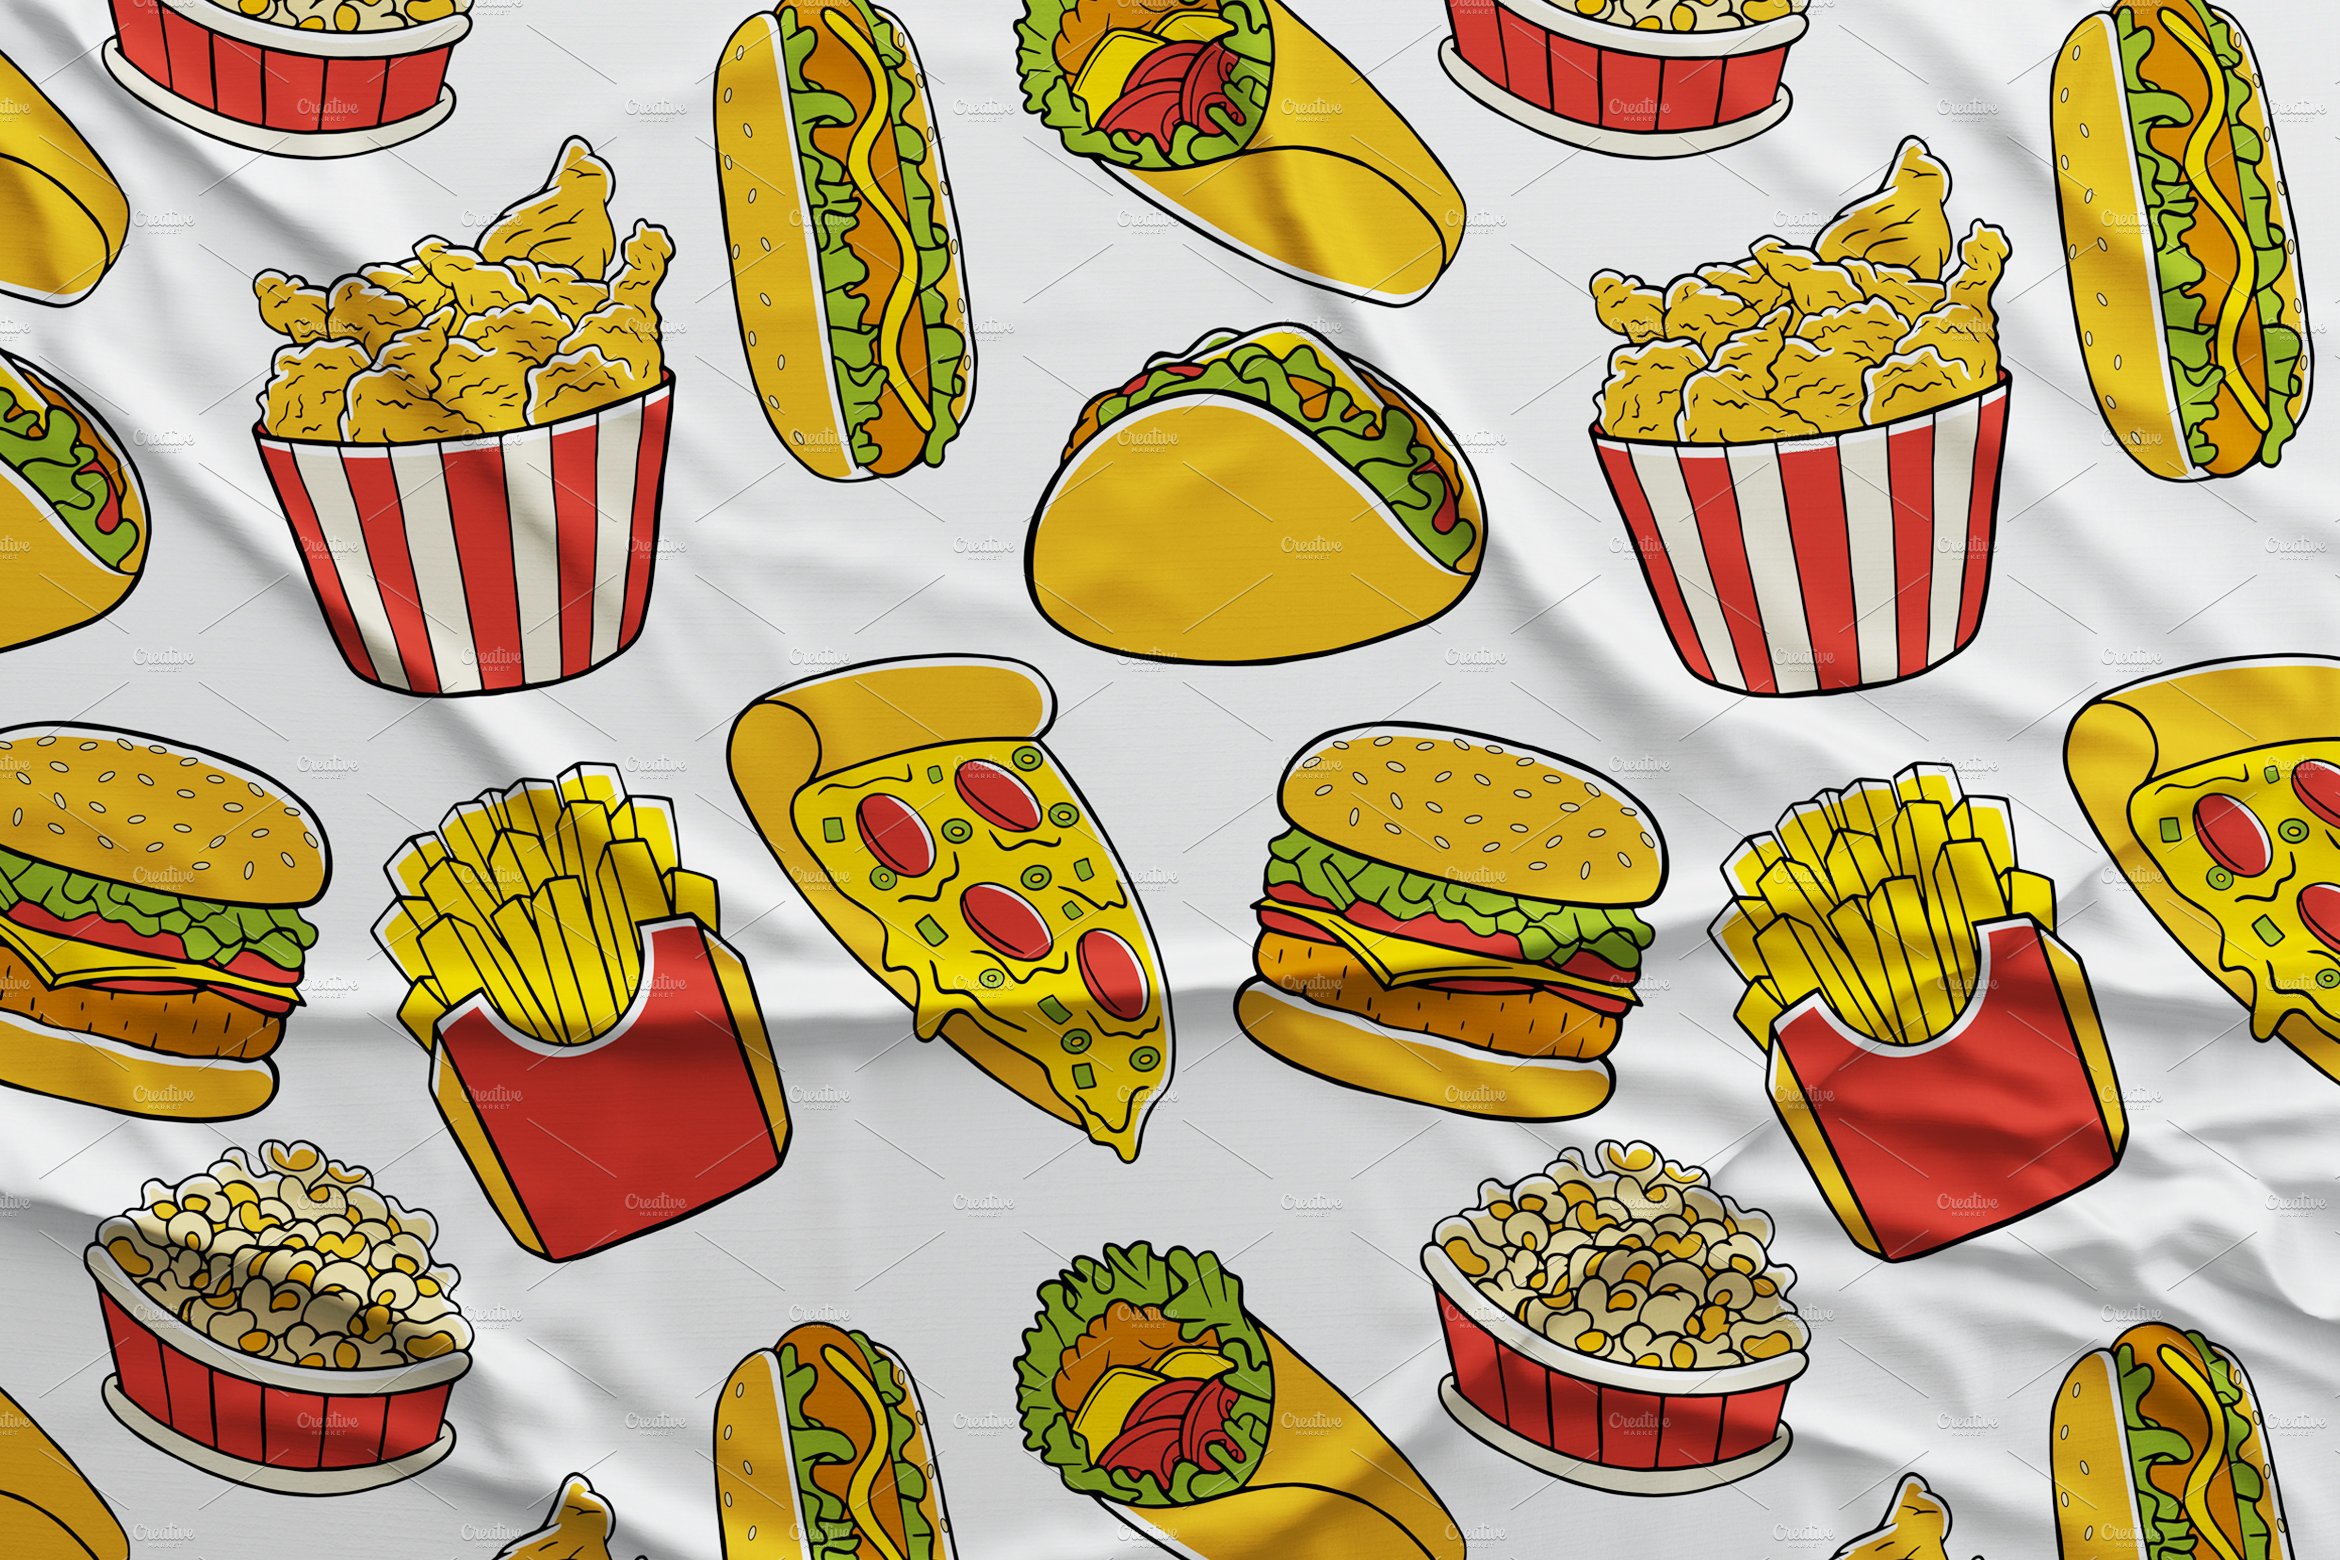 Fast Food Seamless Pattern Pack cover image.